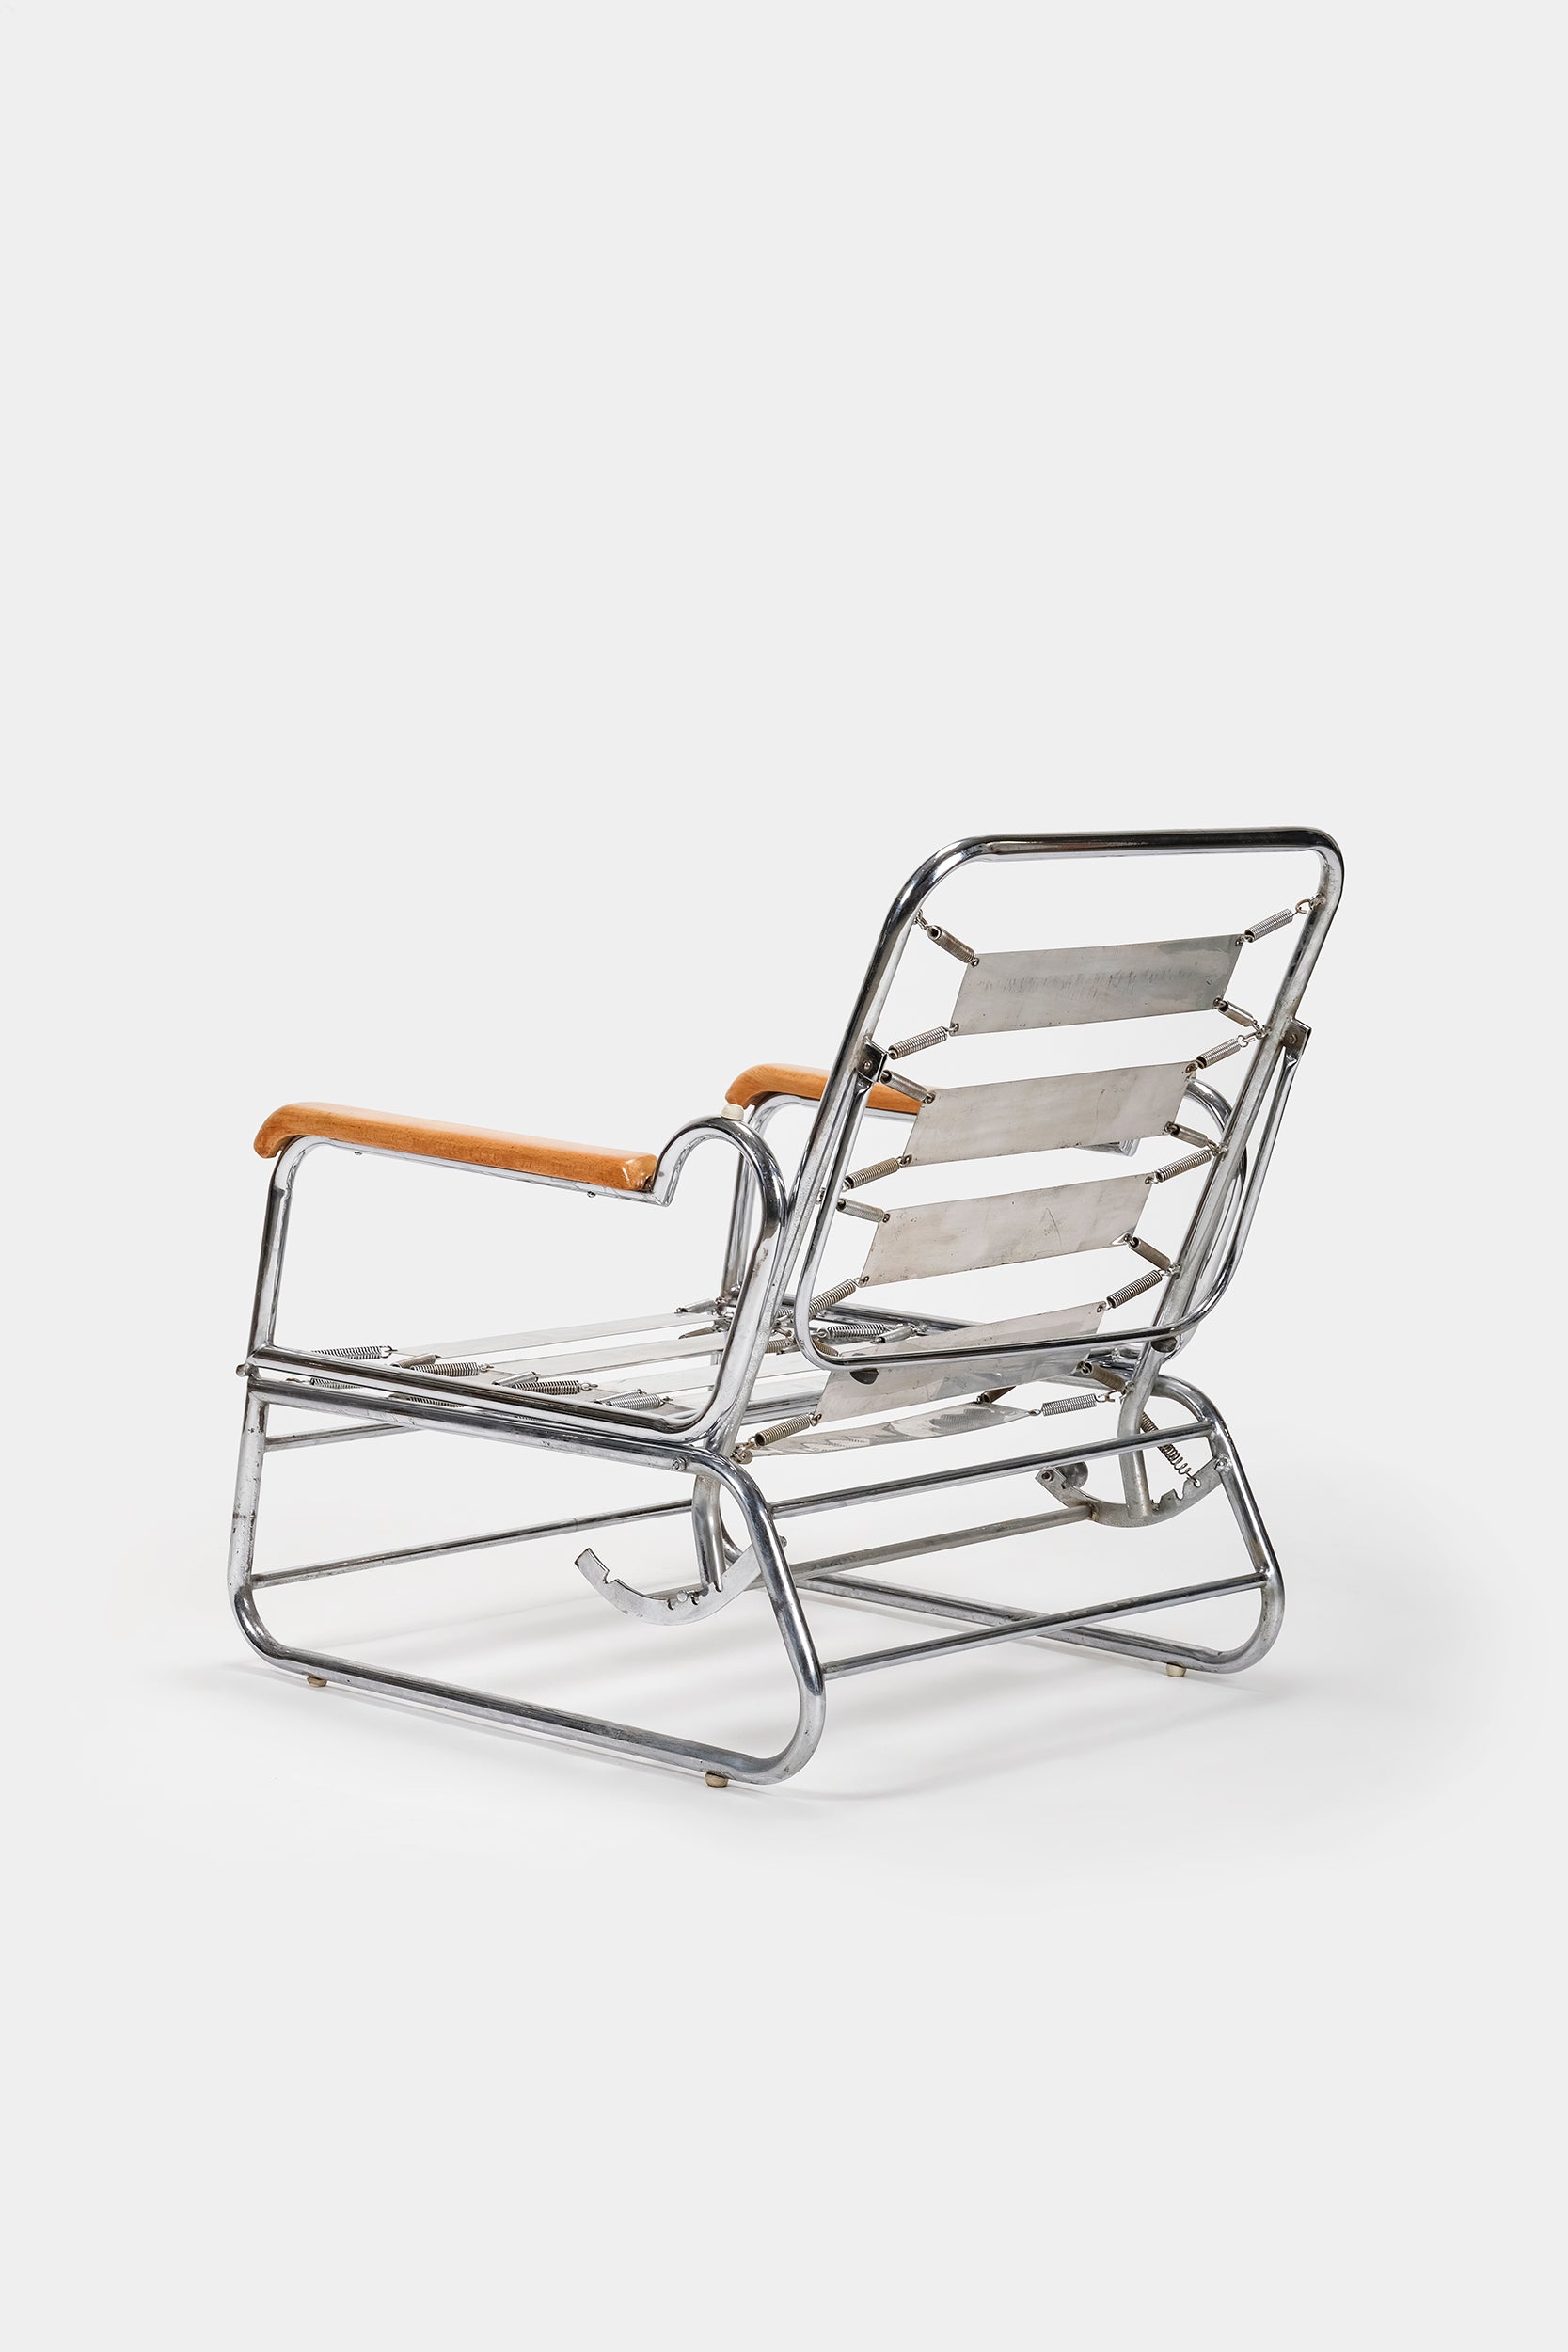 Deck Chair, Foldable, Italy, 30s